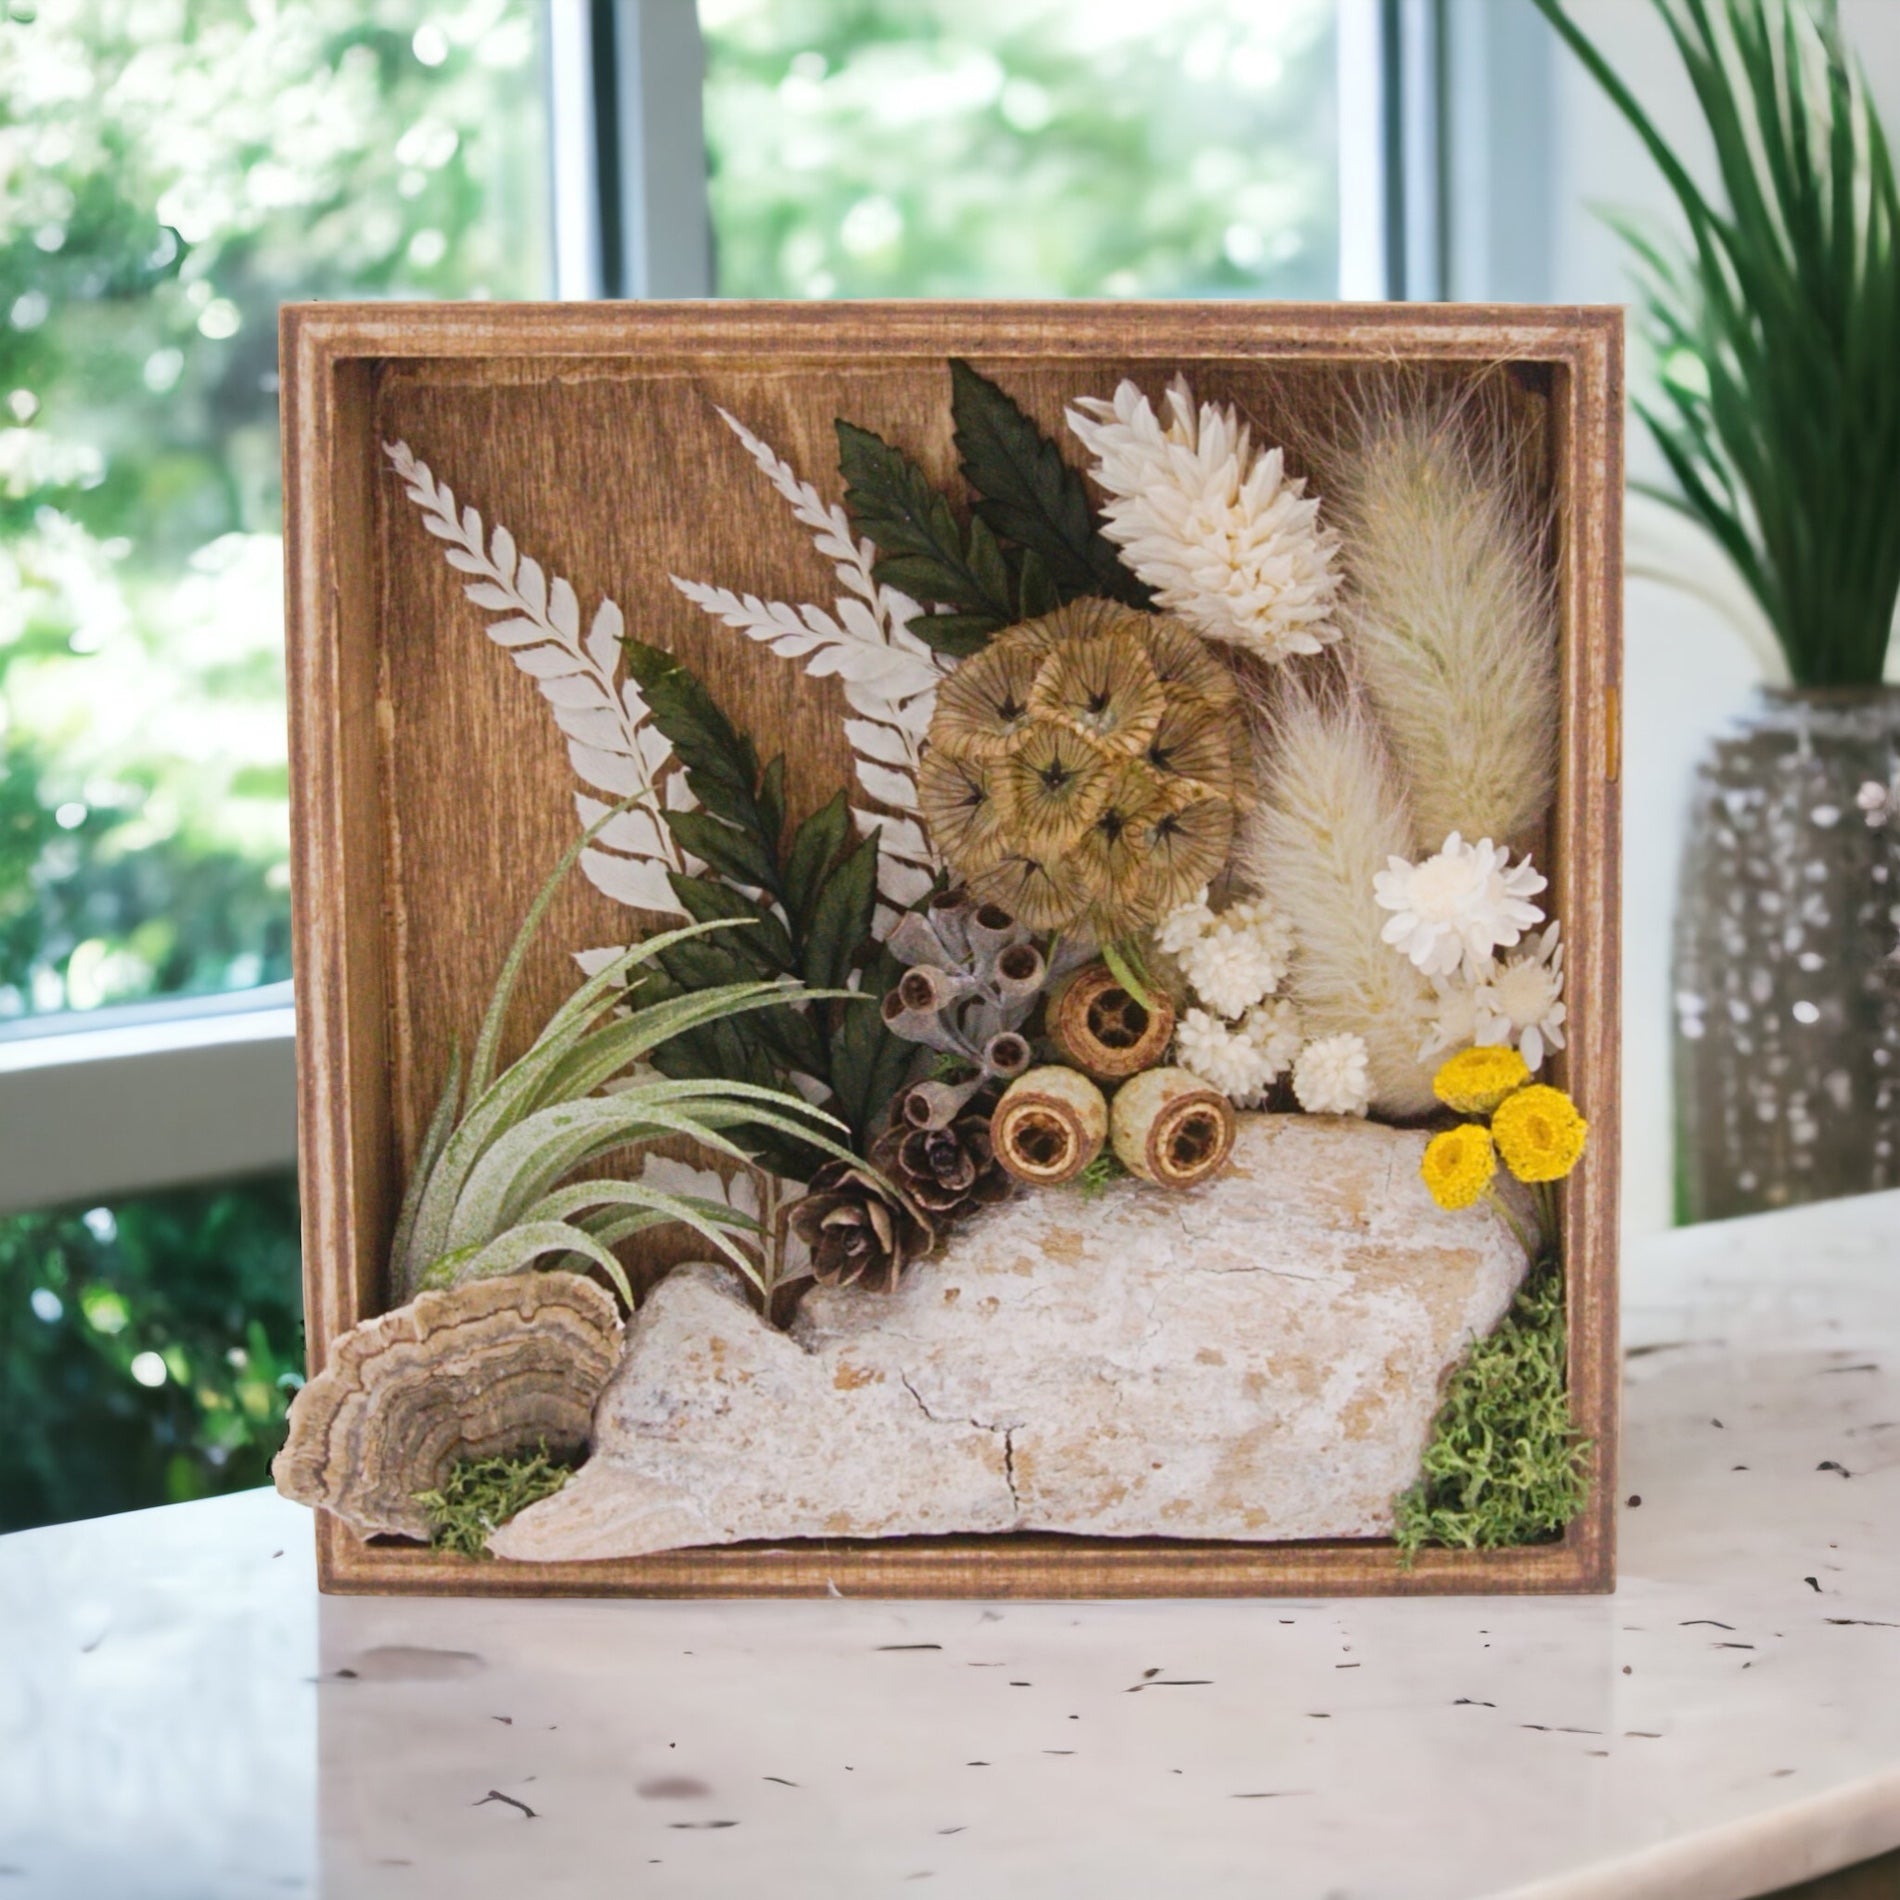 Antique stained wooden box frame filled with dried flowers, wood, moss, dried mushrooms and an airplantWalnut stained box frame filled with dried flowers, dried mushrooms, moss, wood and an airplant